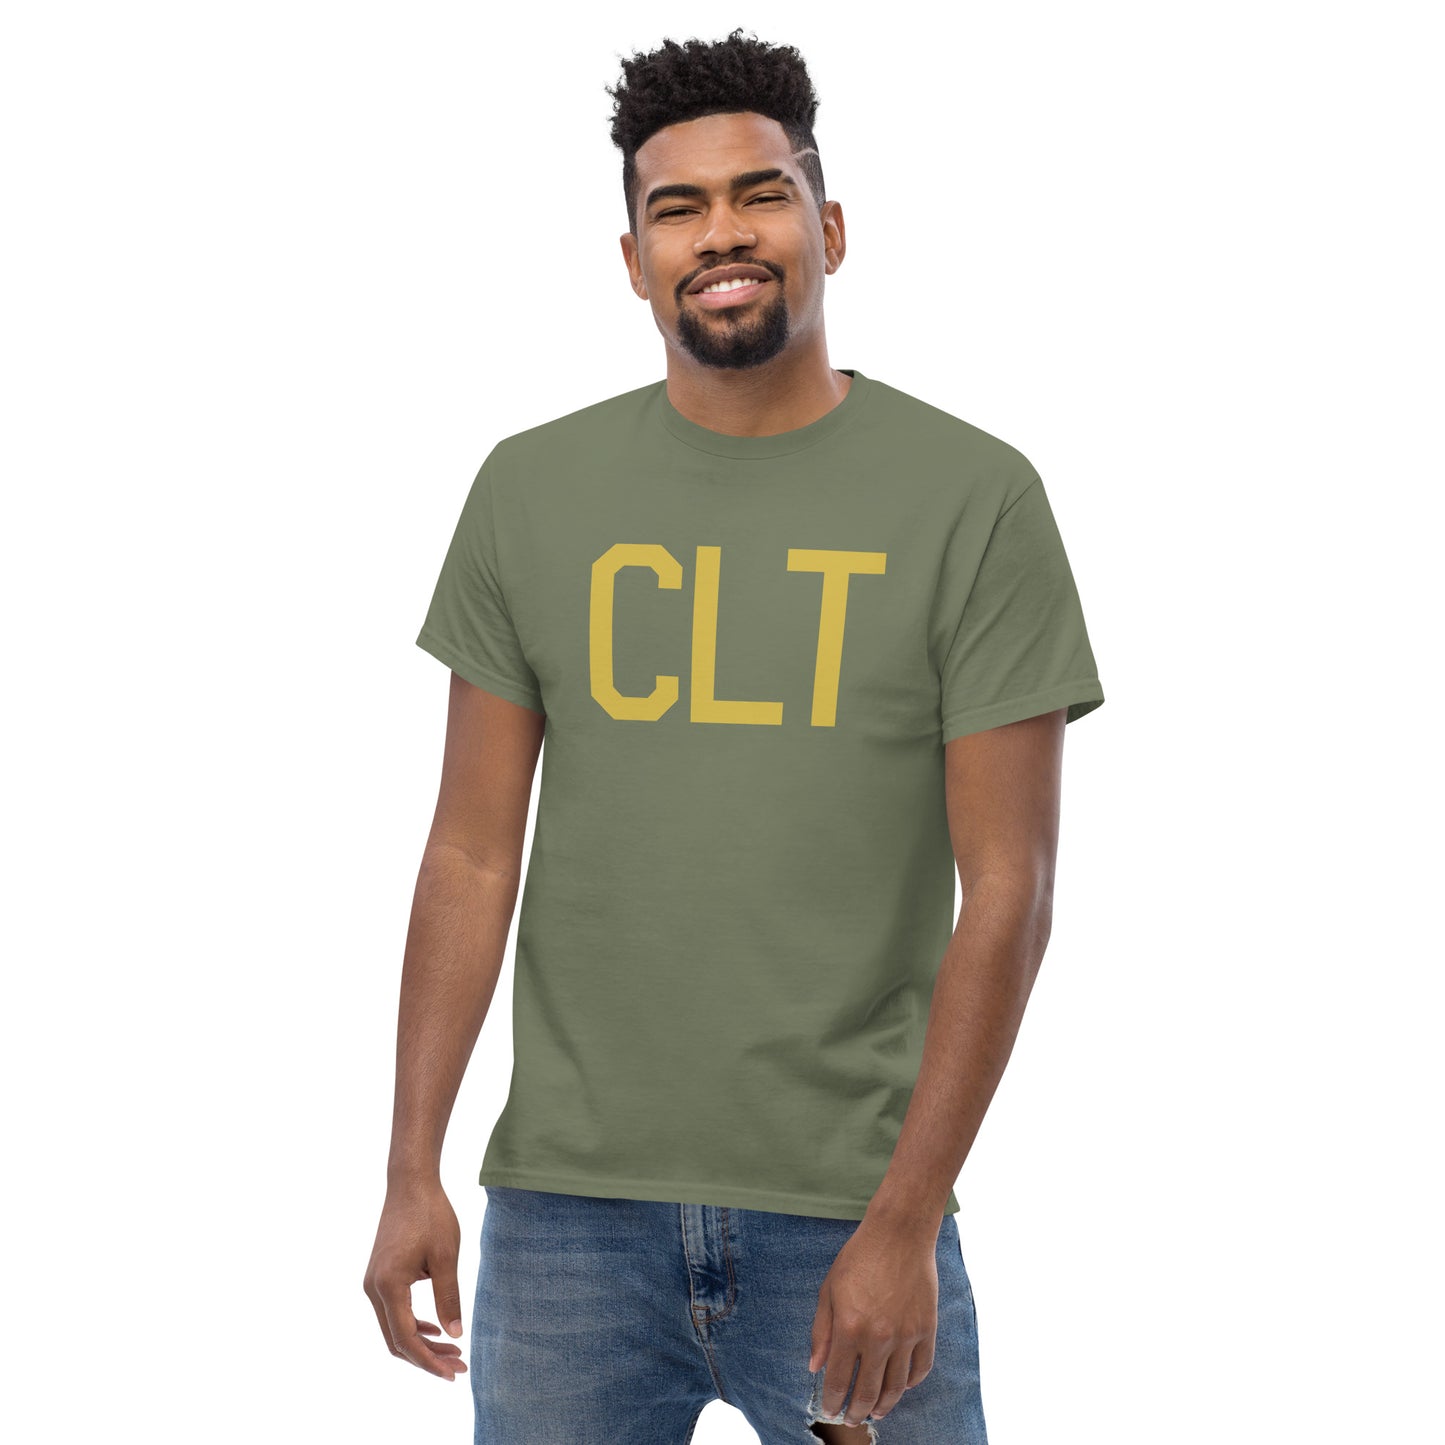 Aviation Enthusiast Men's Tee - Old Gold Graphic • CLT Charlotte • YHM Designs - Image 06